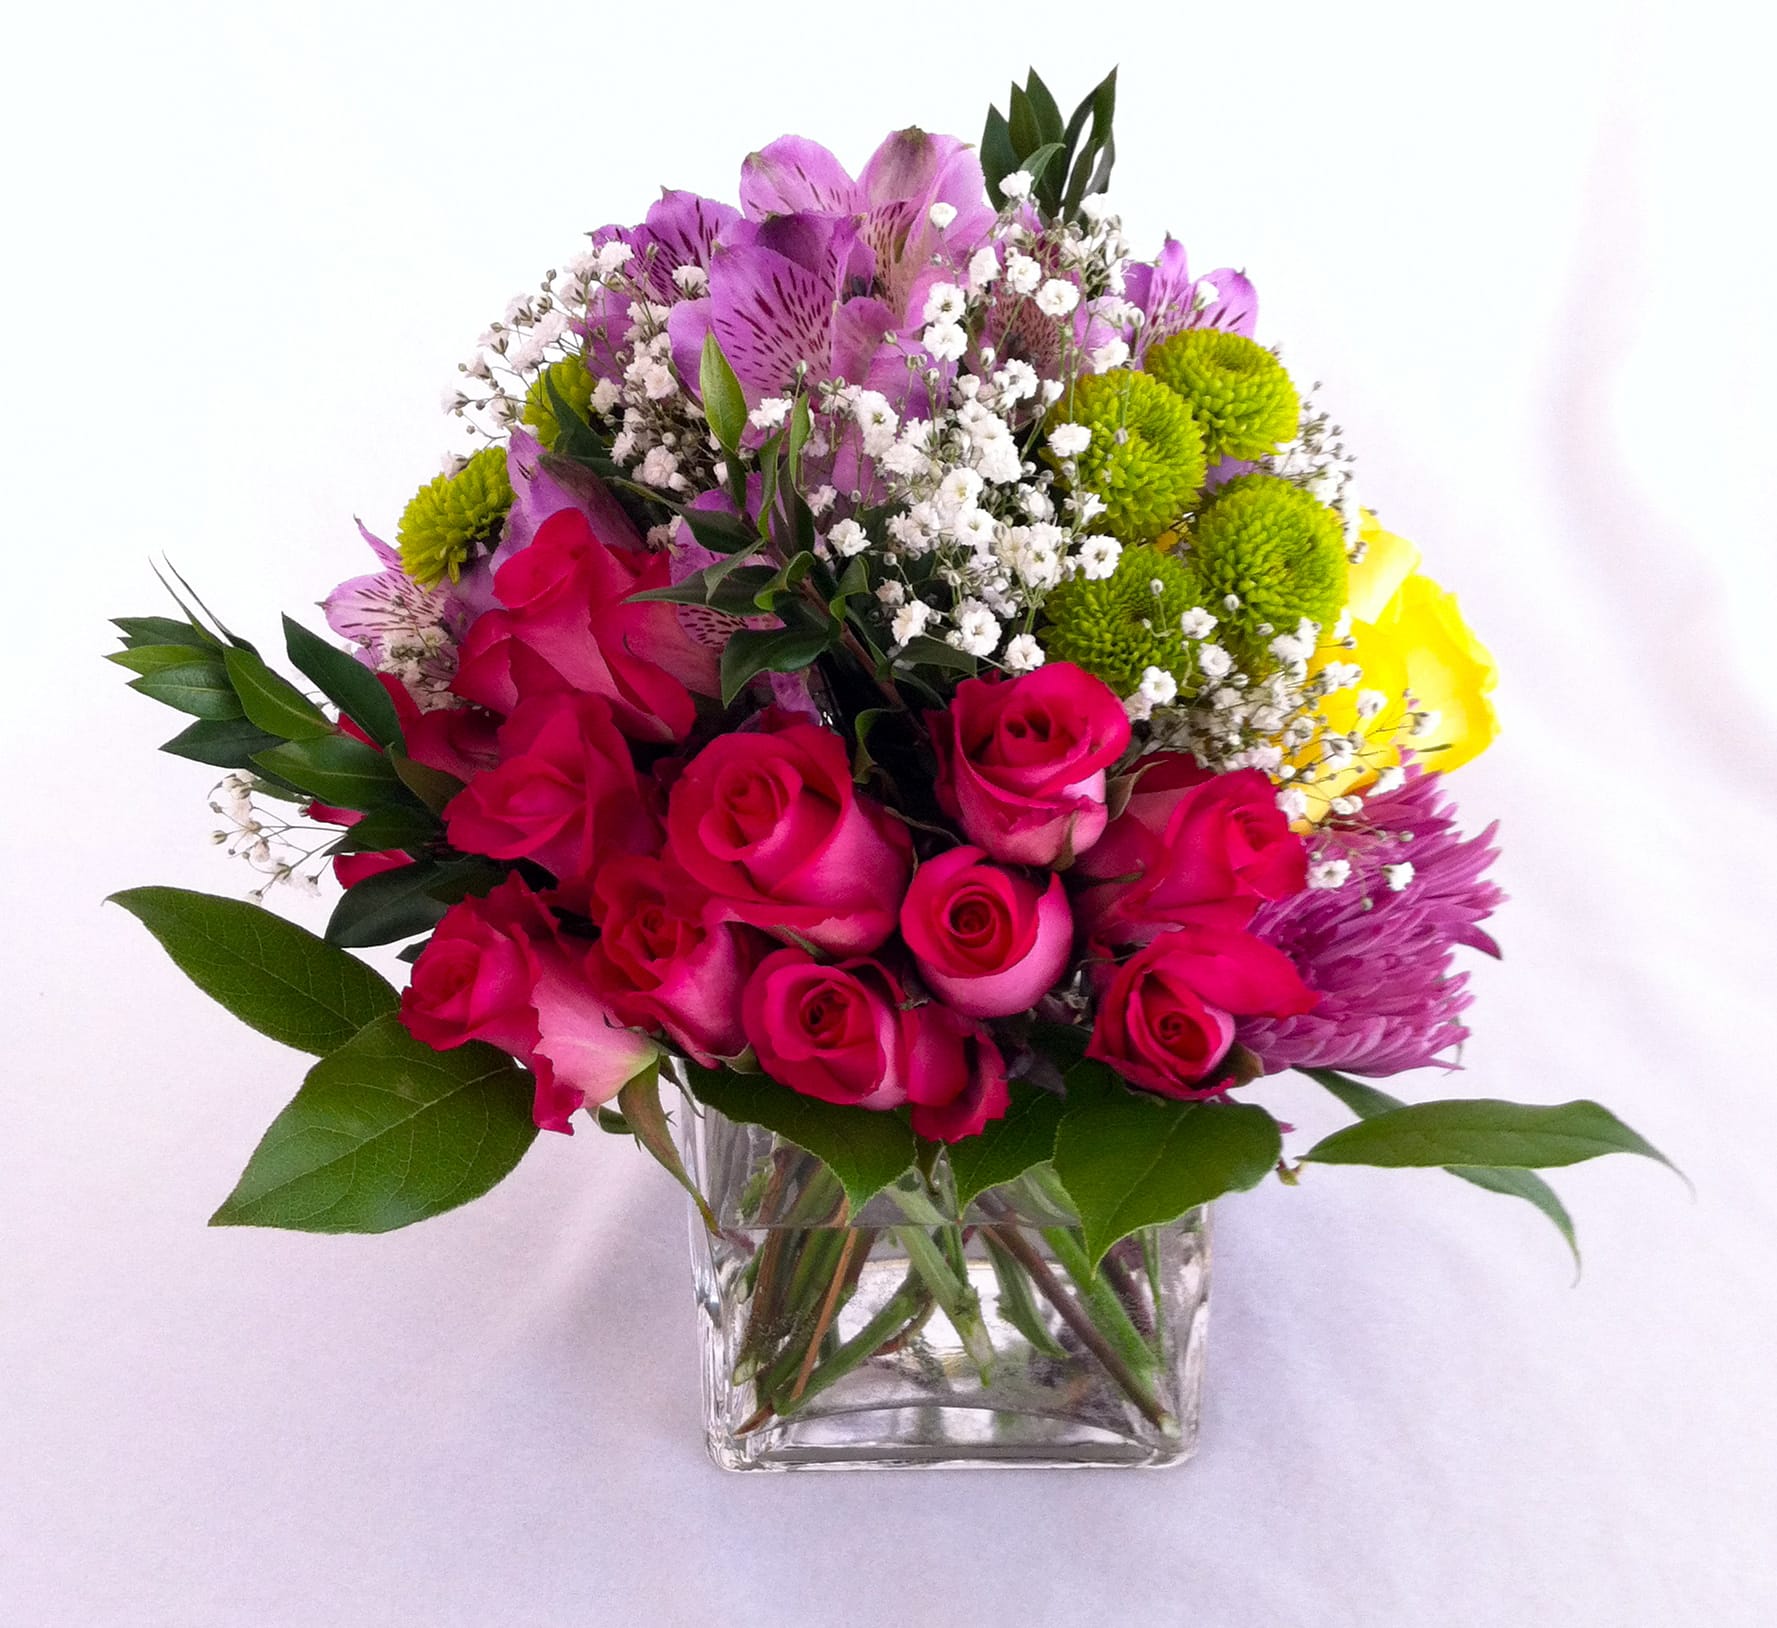 Rainbow - A cube glass vase holding an array of hot pink roses on one side and bright yellow roses on the opposite side, and in between we added purple fuji mums, lavender alstroemerias, and green buttons, accented with baby's breath and different greeneries, to surprise anyone!